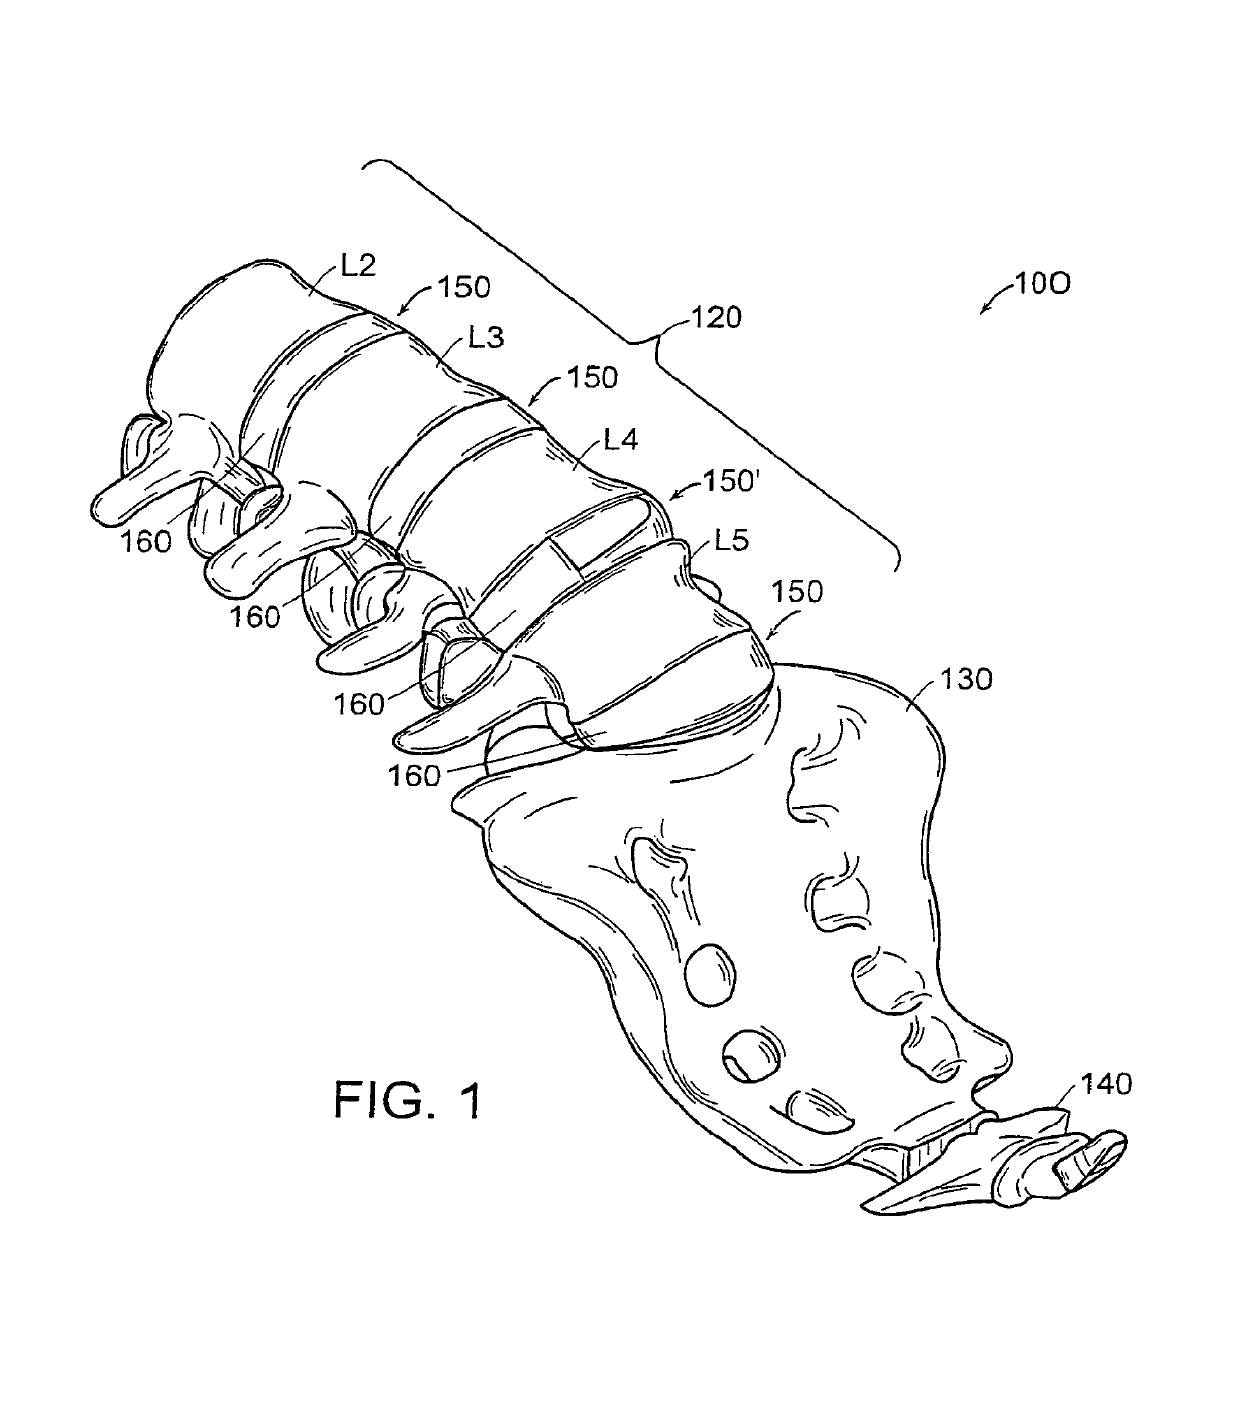 Intervertebral implant with conformable endplate